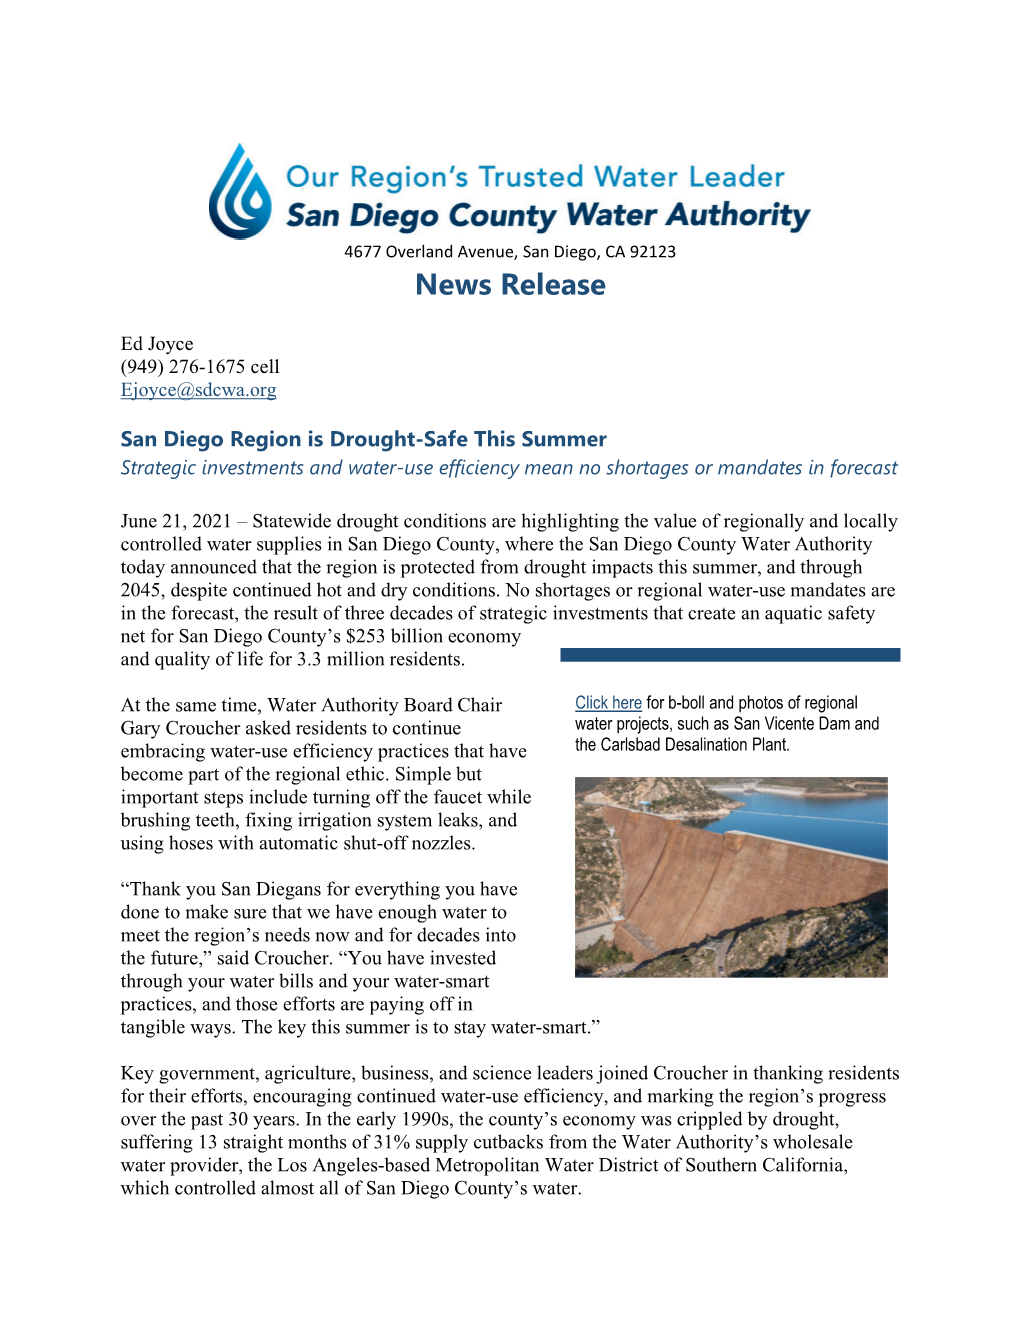 San Diego Region Is Drought-Safe This Summer Strategic Investments and Water-Use Efficiency Mean No Shortages Or Mandates in Forecast